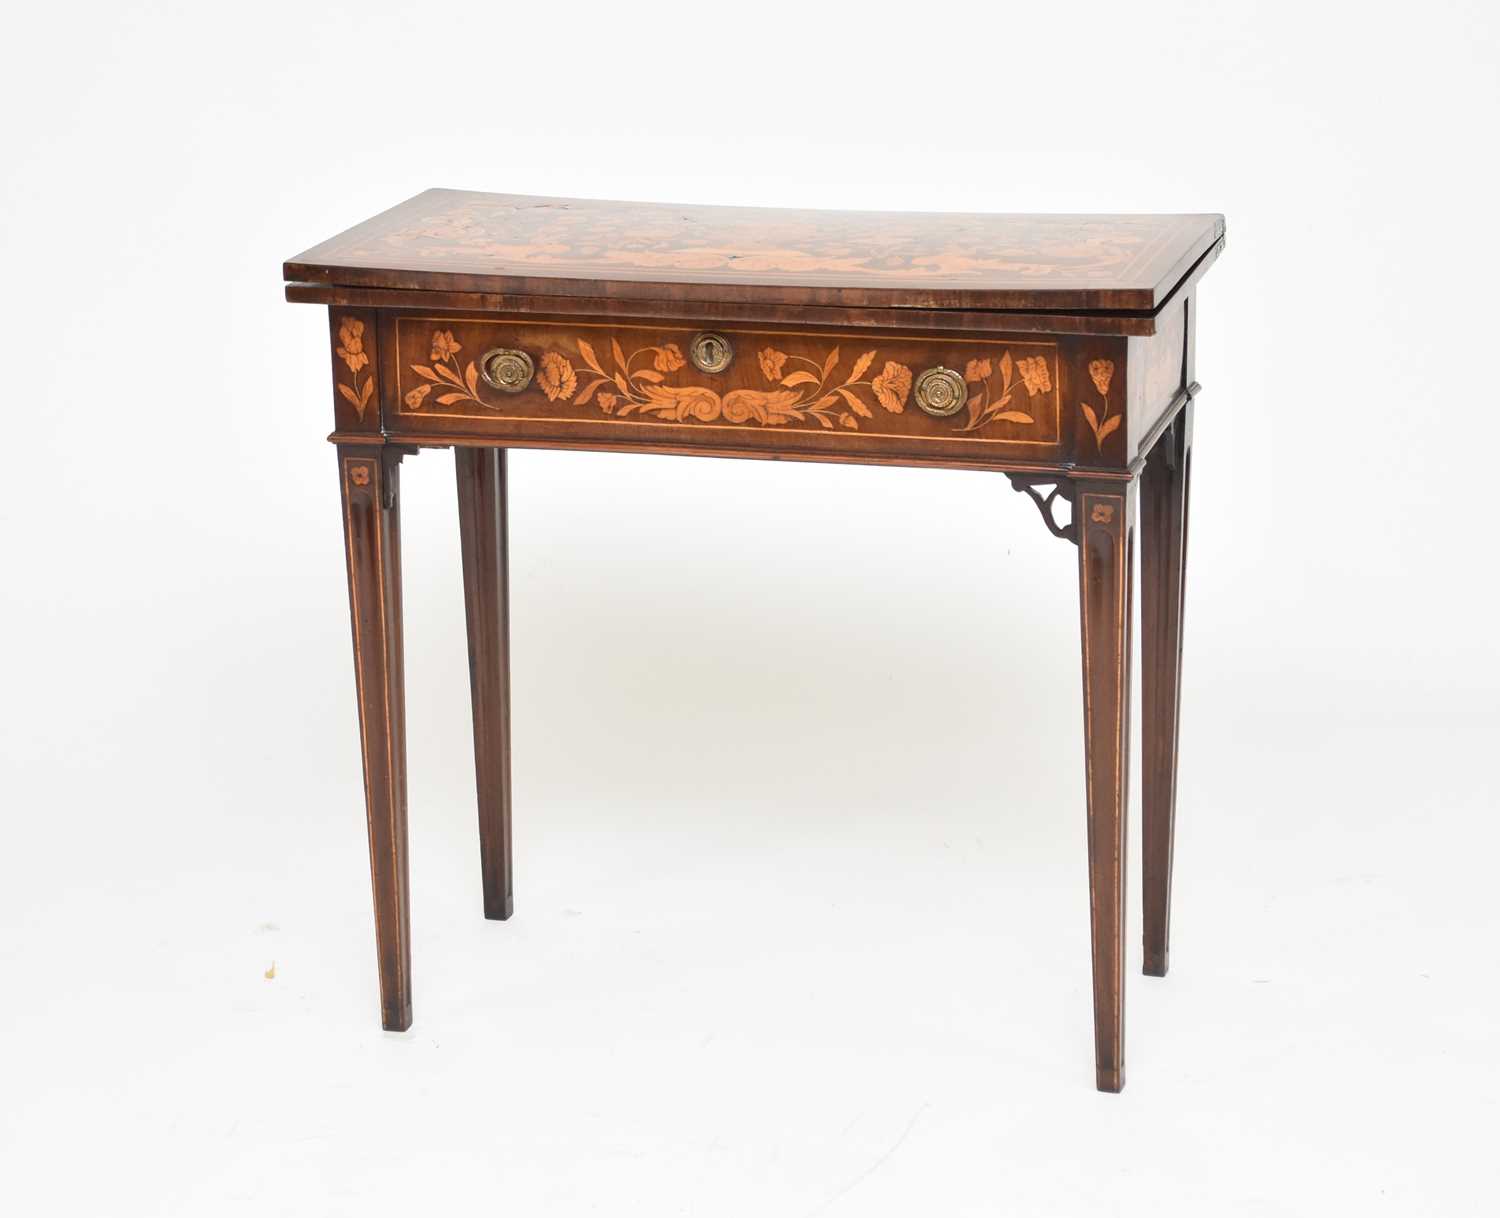 A late 18th century Dutch marquetry card table